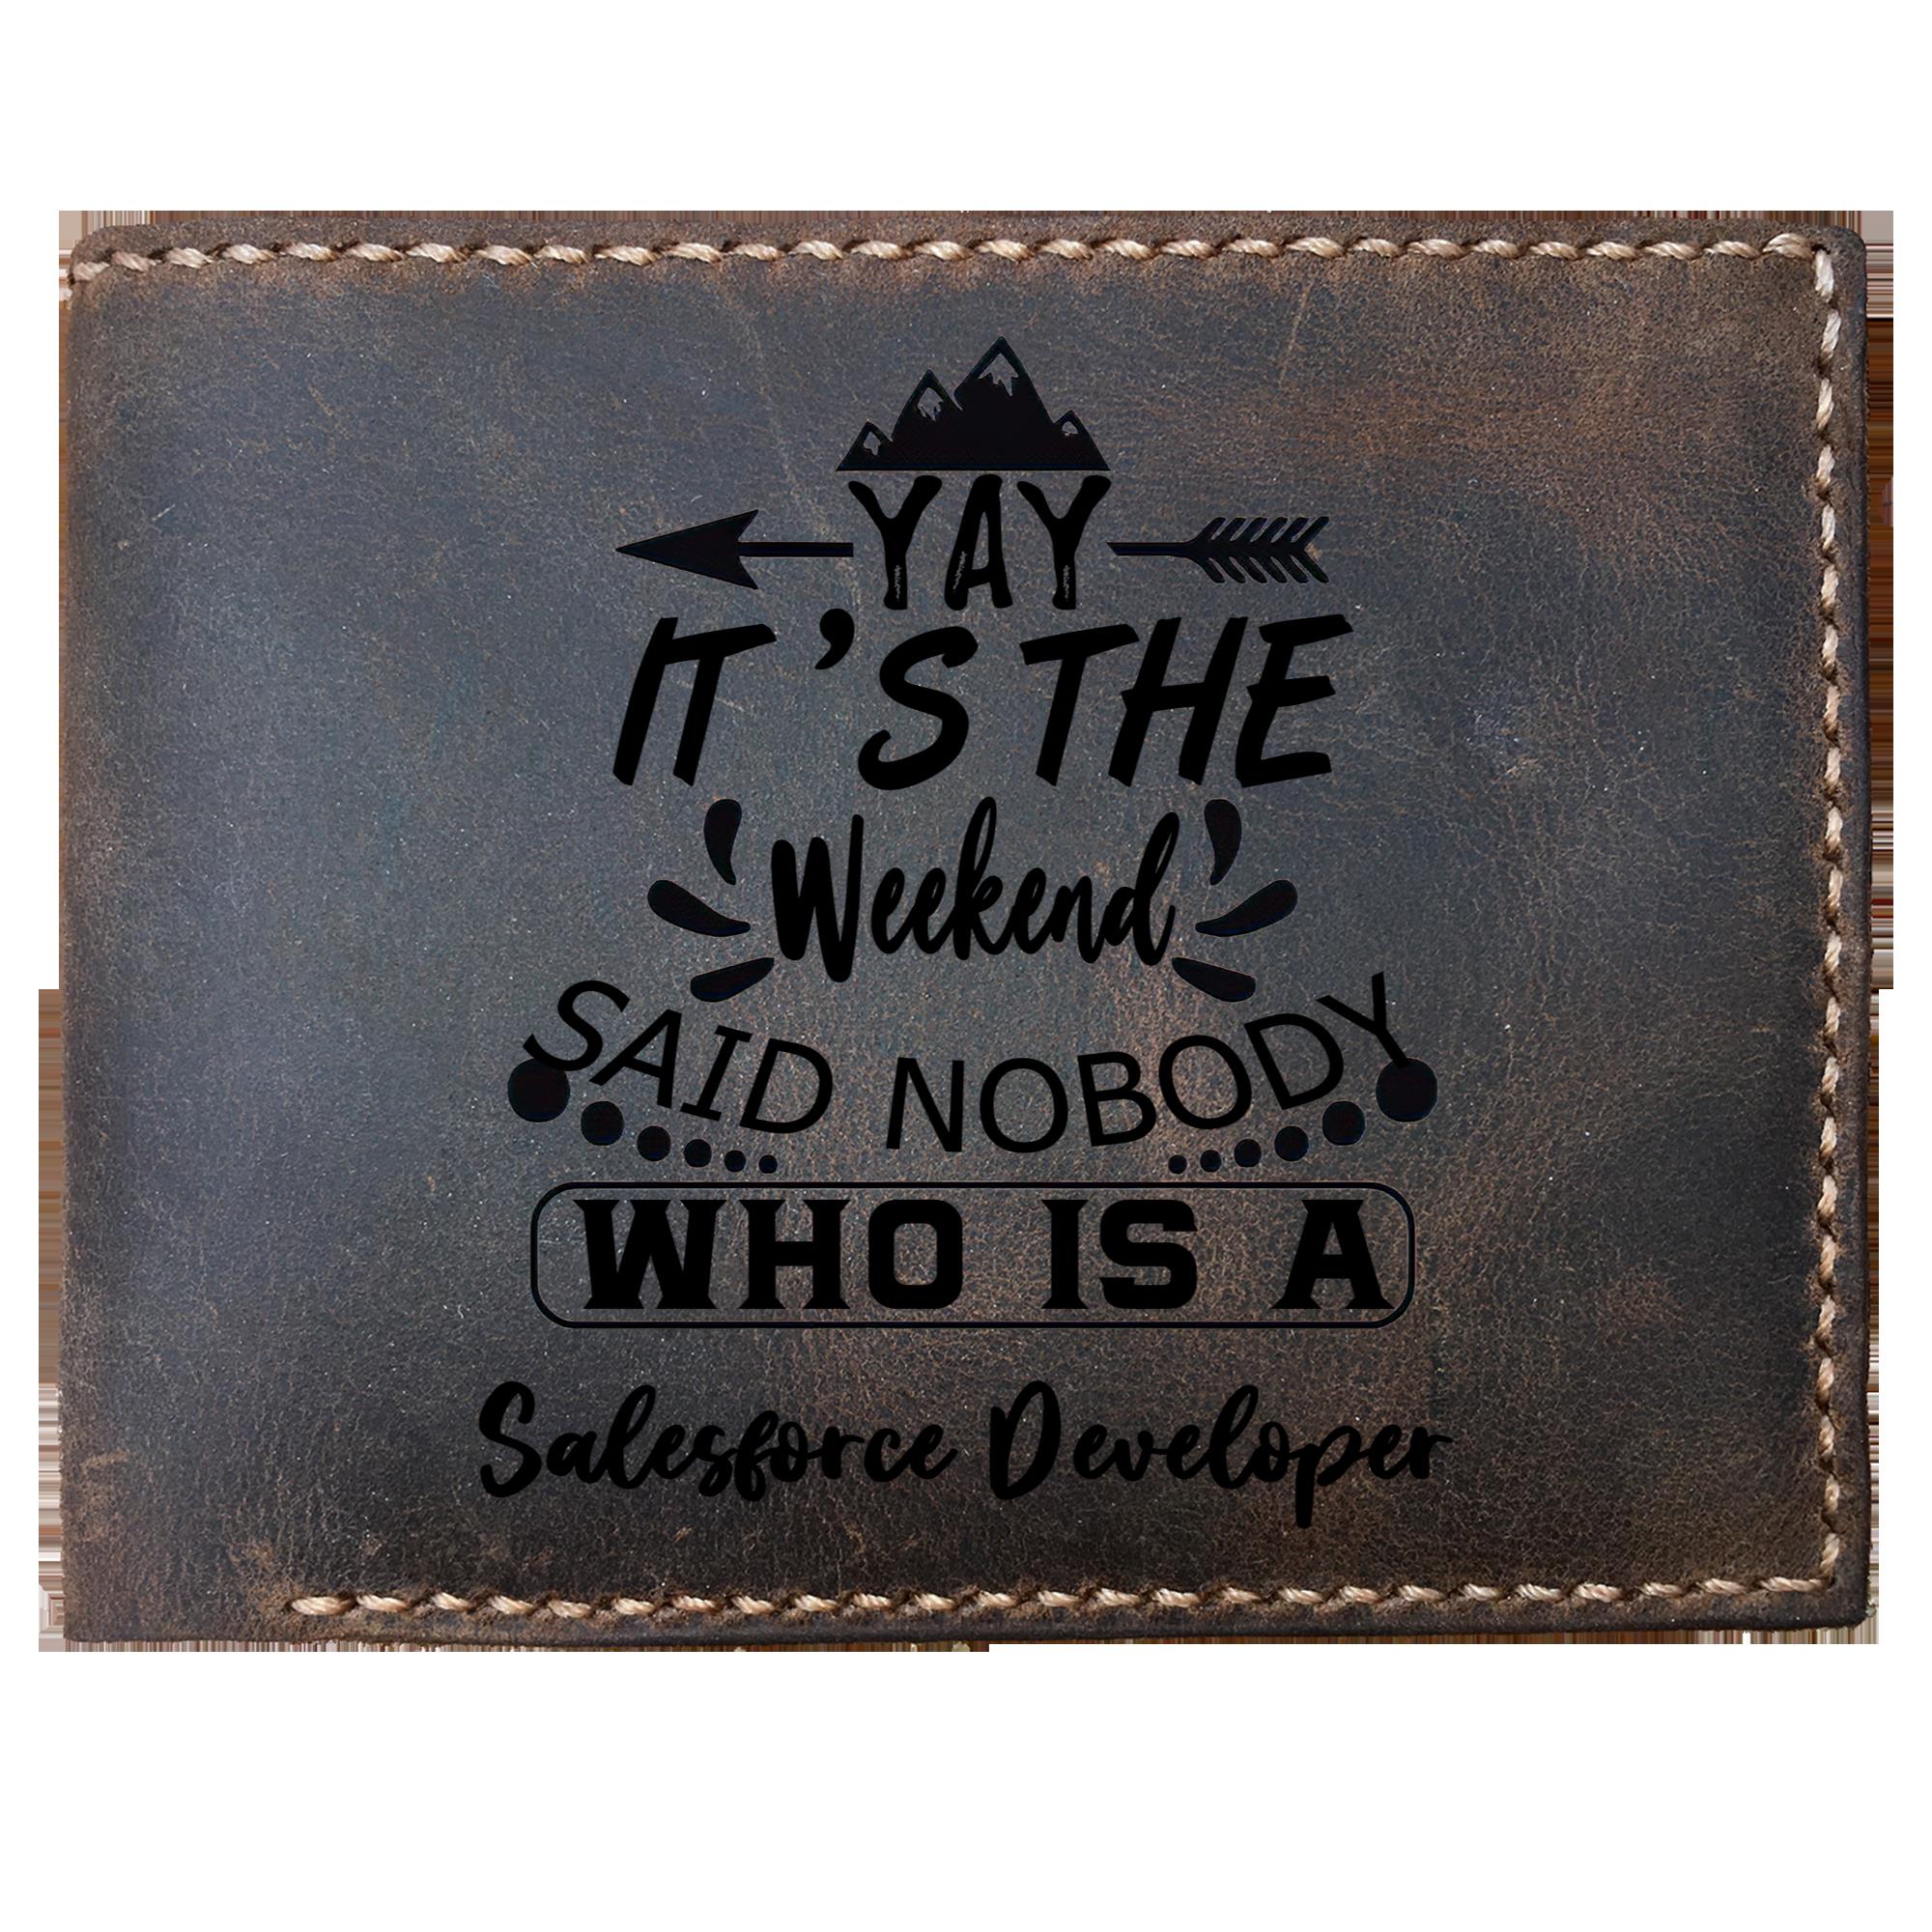 Skitongifts Funny Custom Laser Engraved Bifold Leather Wallet For Men, It's The Weekend Said Nobody Who Is A Salesforce Developer, Father's Day Gifts